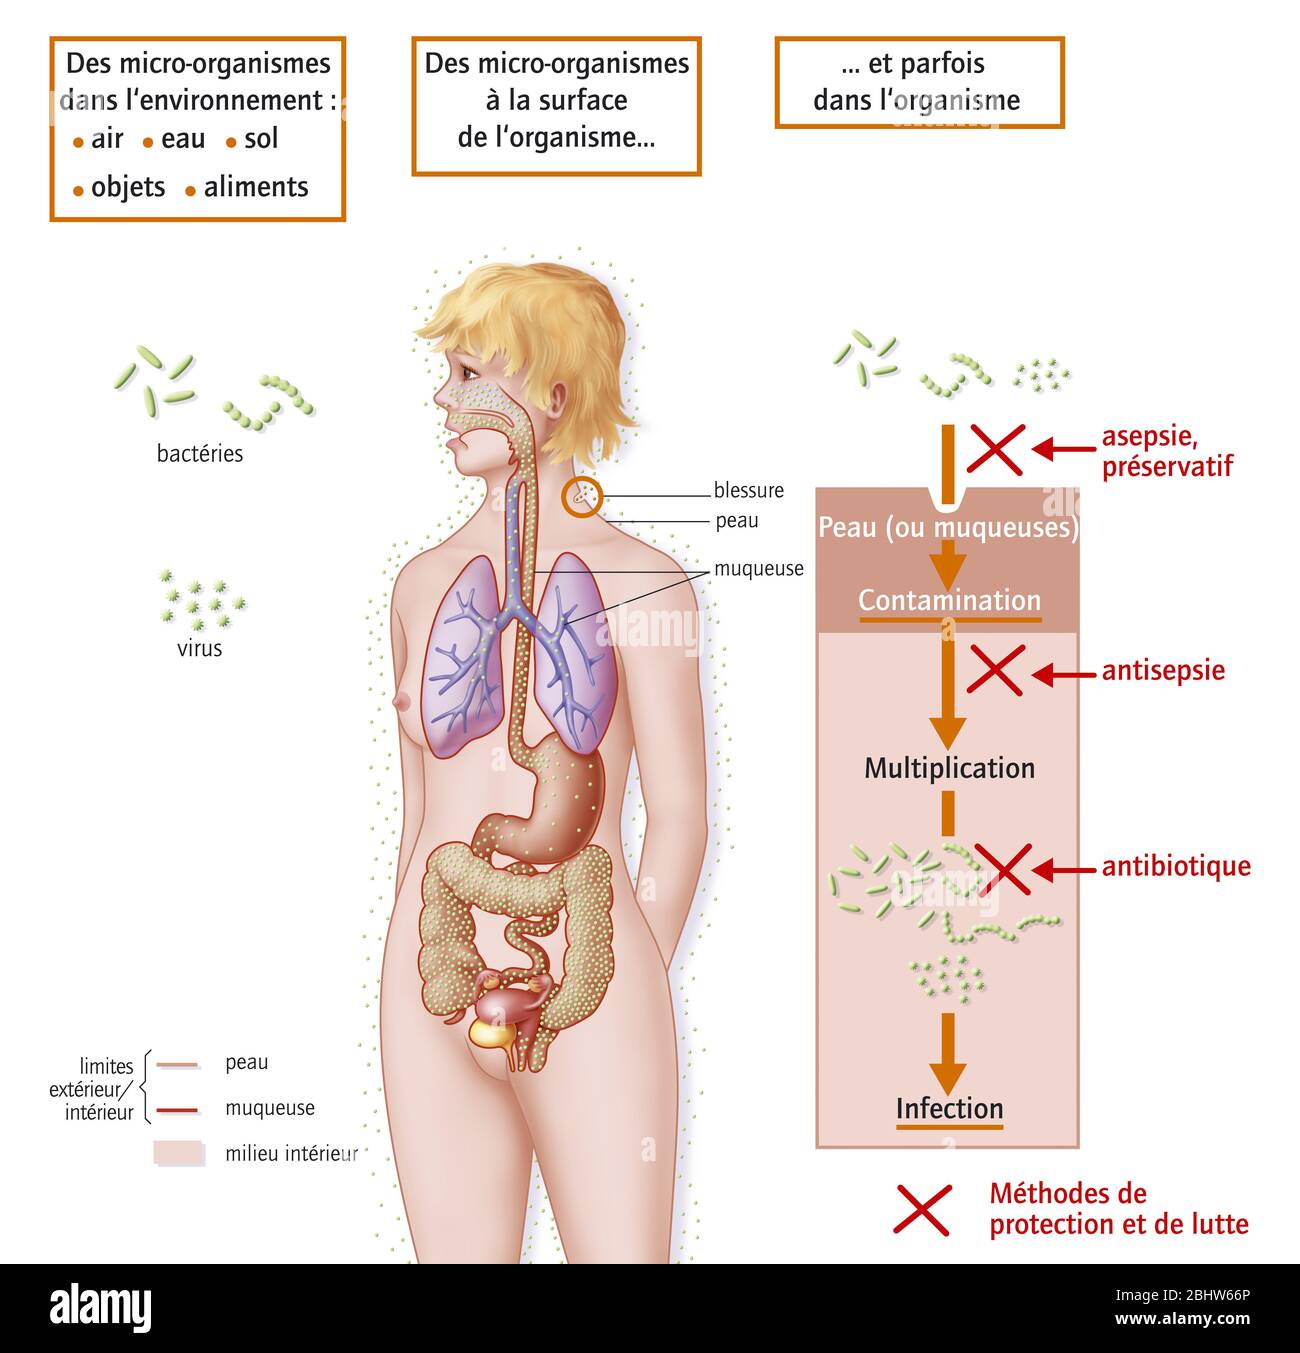 Entry doors of microorganisms into the human organism, bacteria, viruses.The part of the illustration on the 2/3 left explains that the bacteria and v Stock Photo